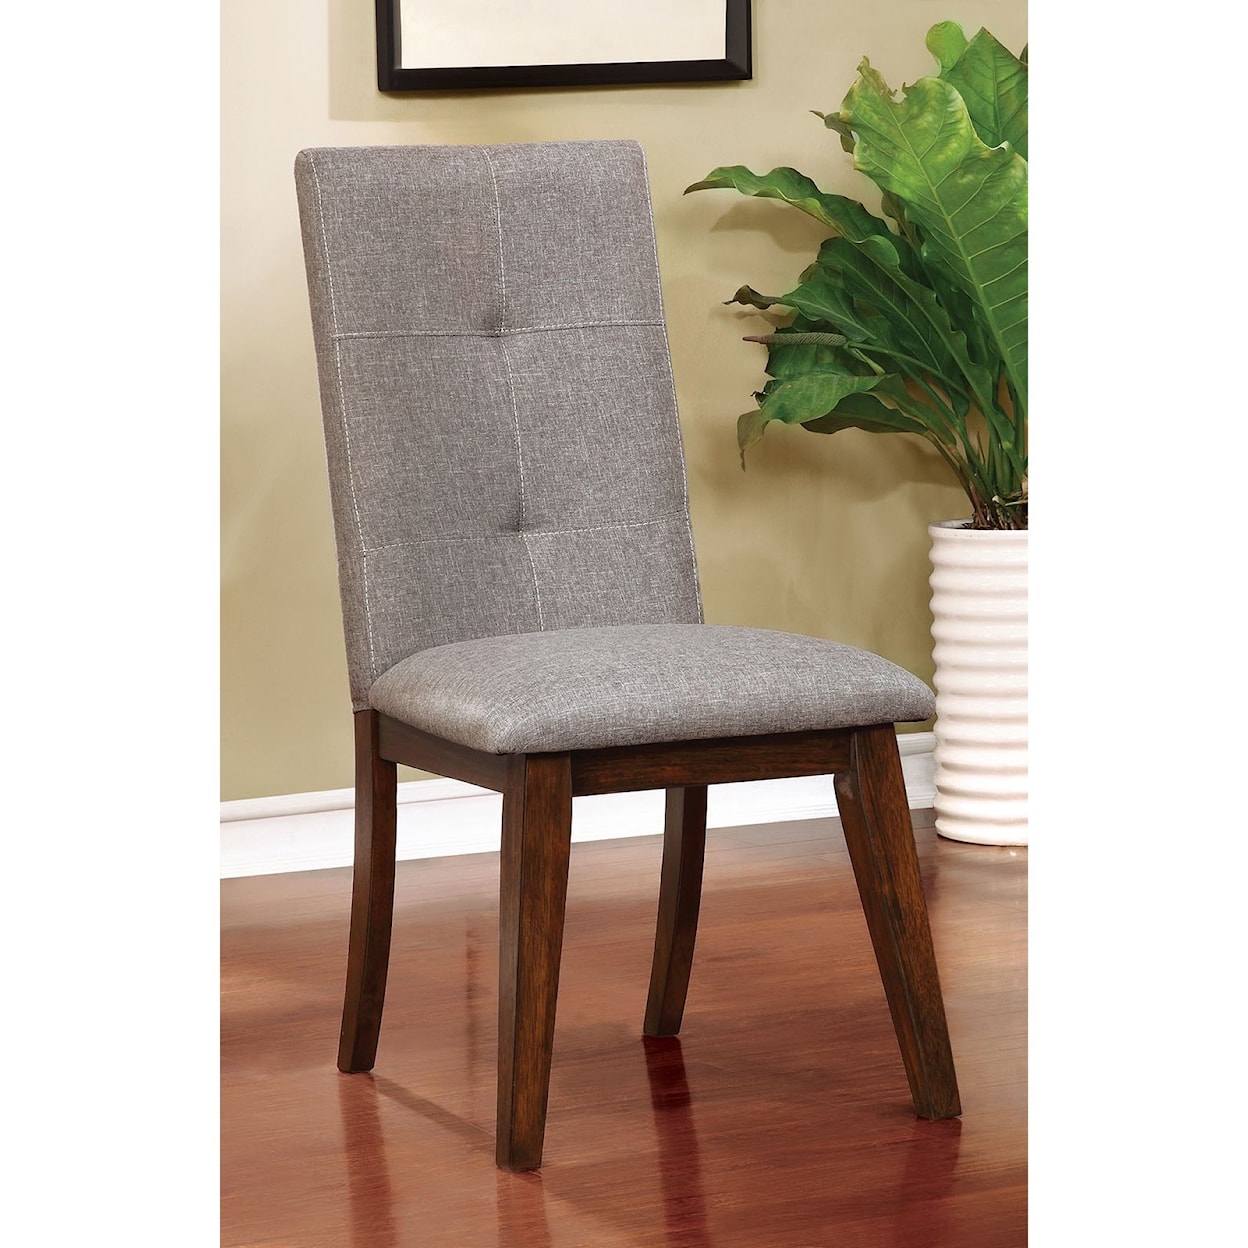 Furniture of America Abelone Set of 2 Side Chairs